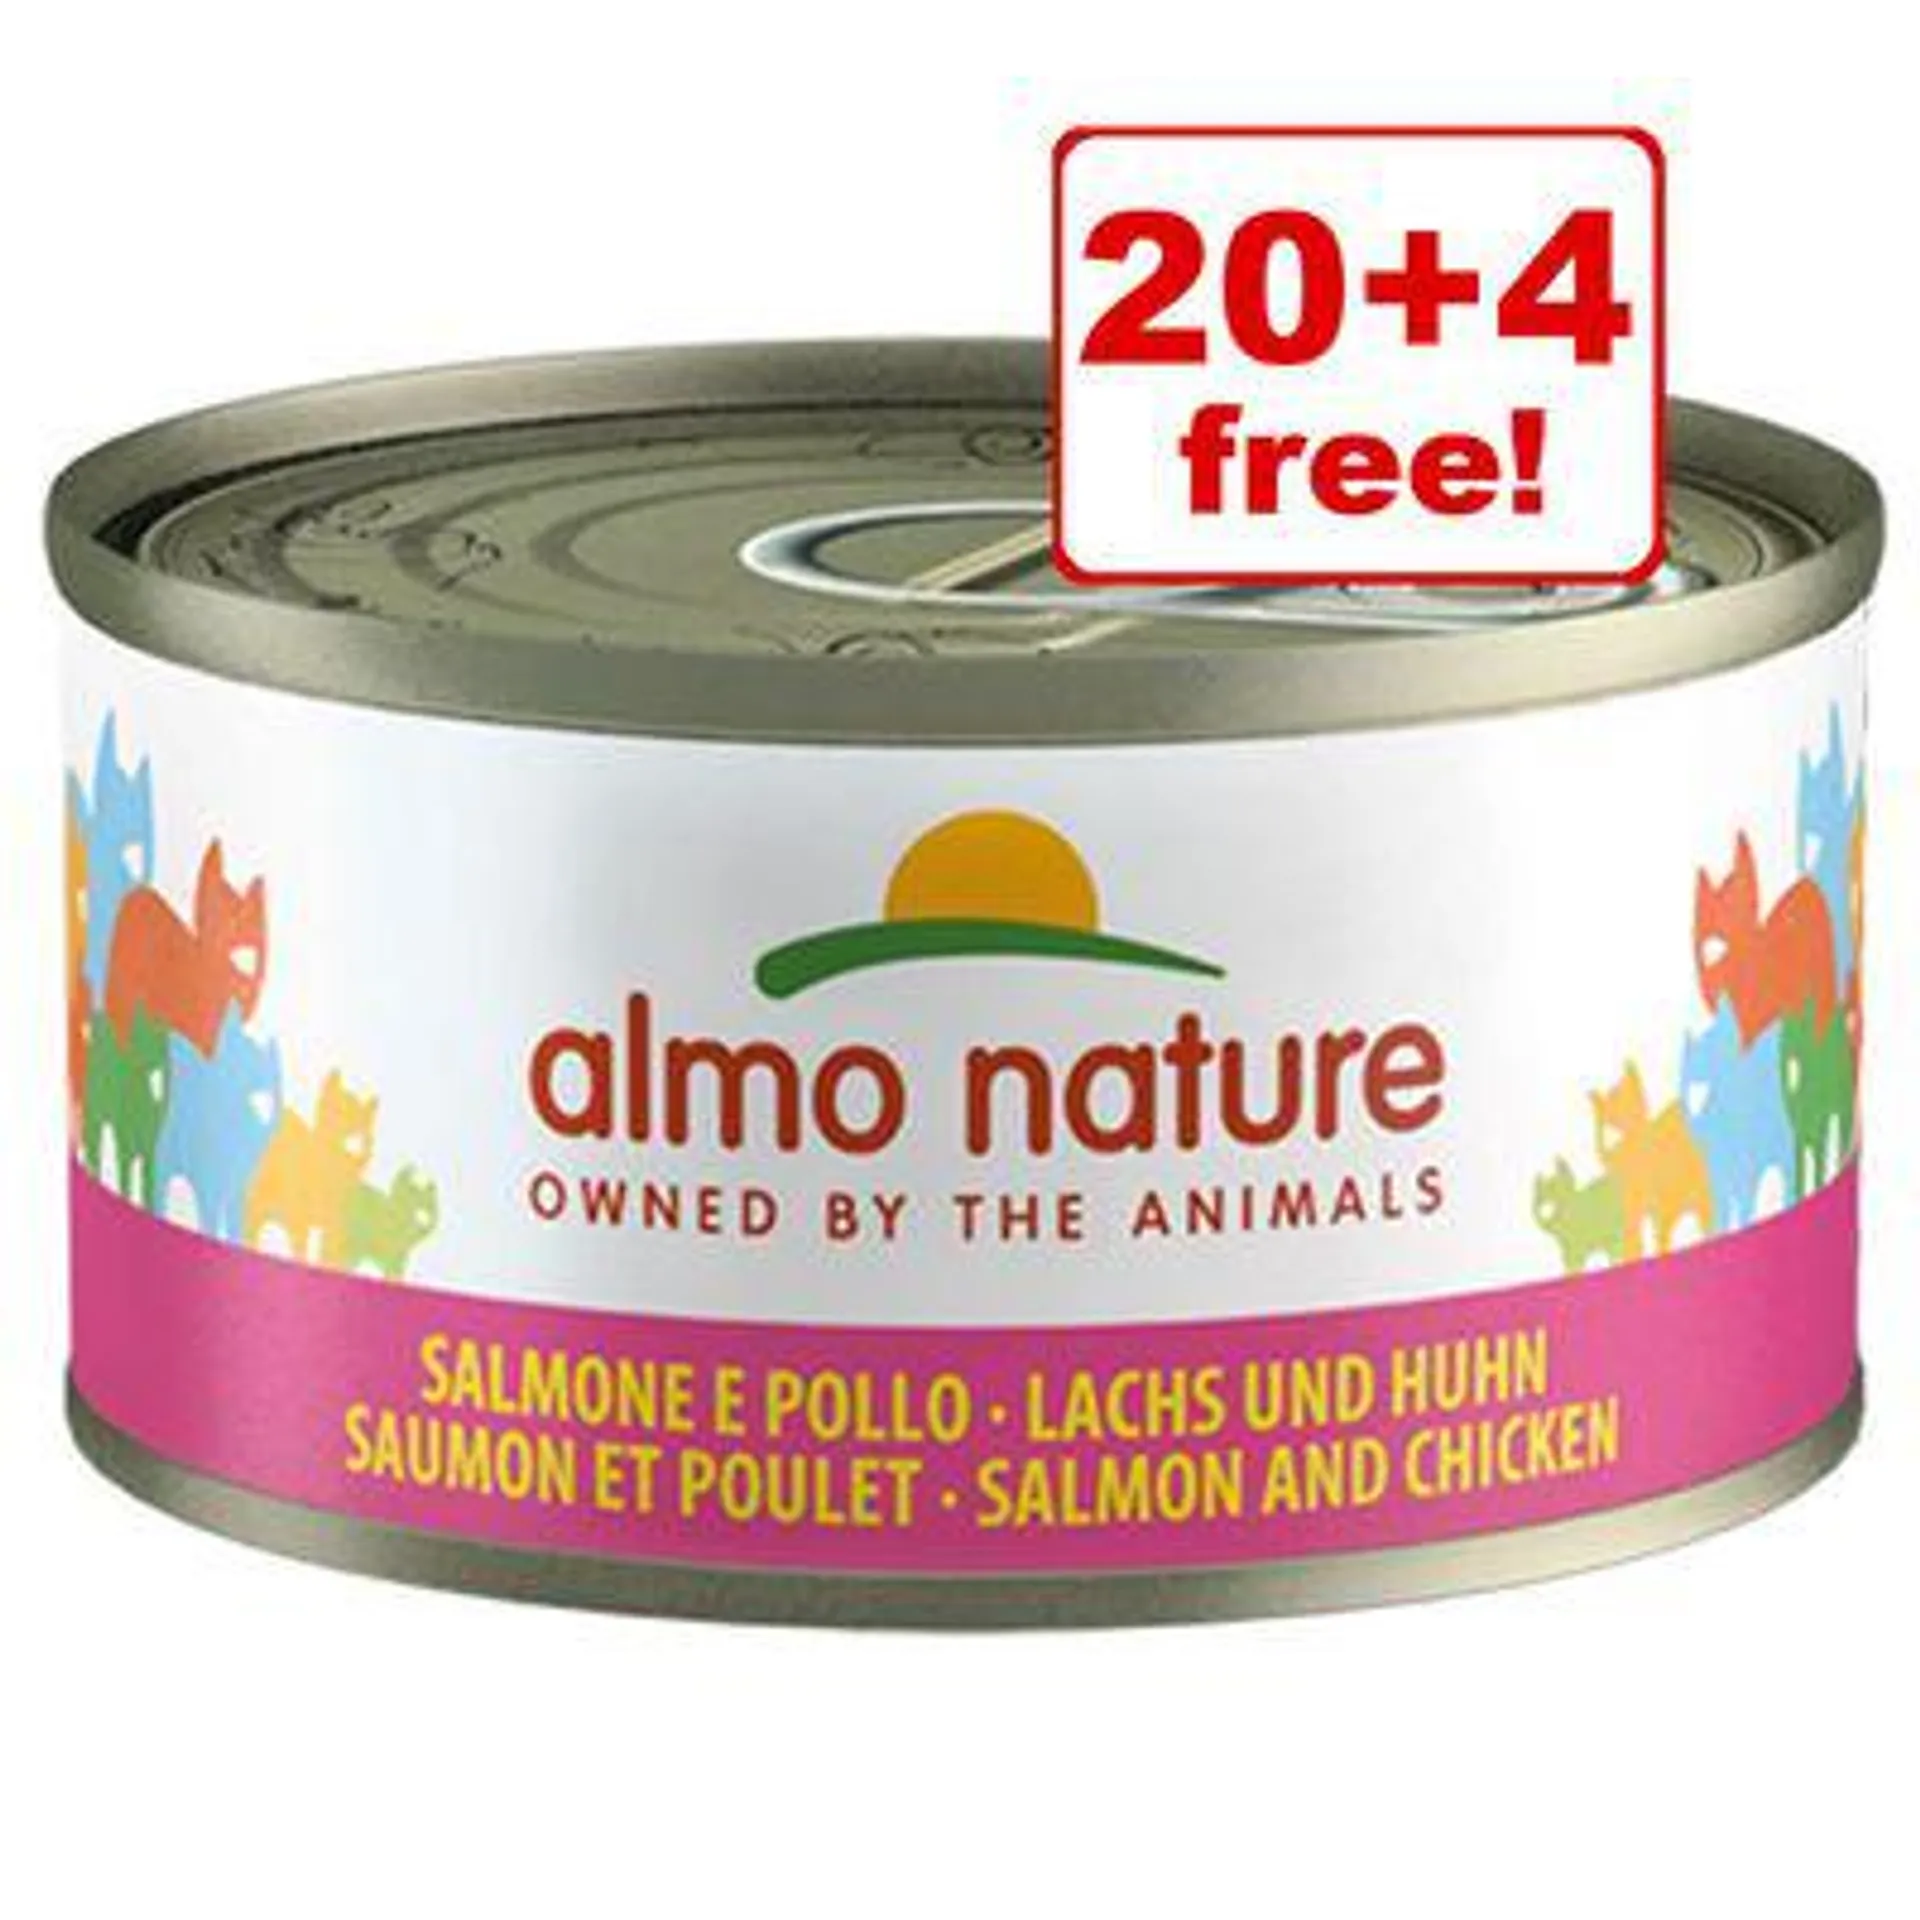 24 x 70g Almo Nature Wet Cat Food - 20 + 4 Free! *